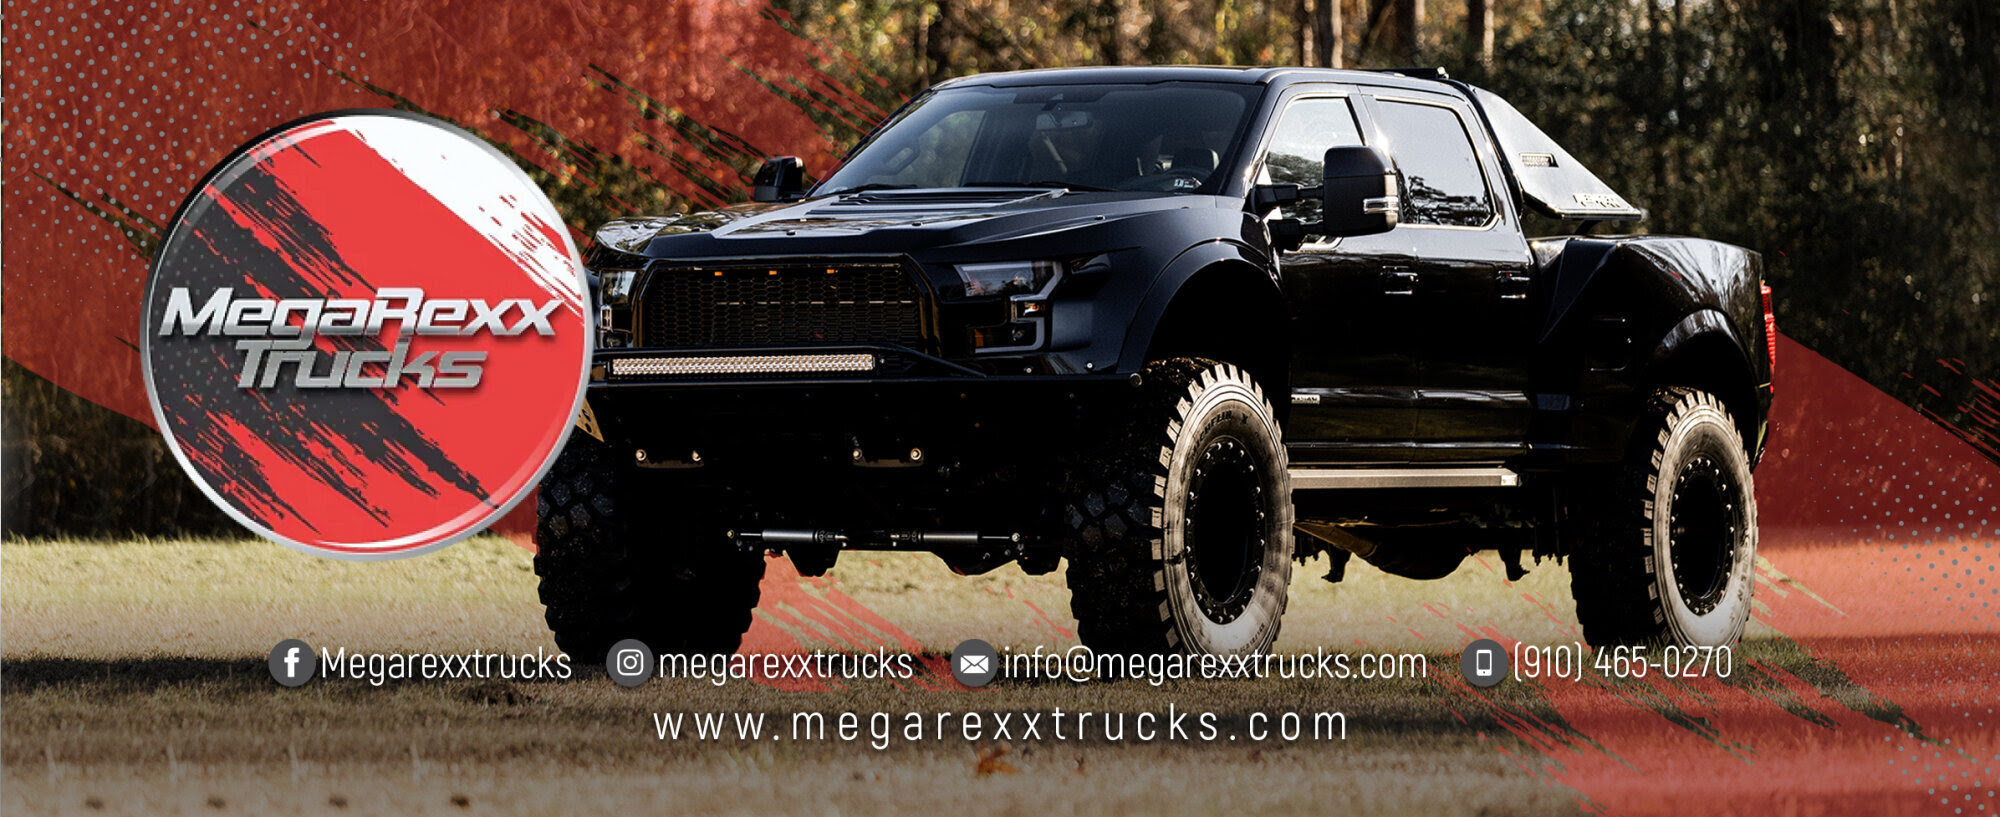 The MegaRexx Trucks Collection